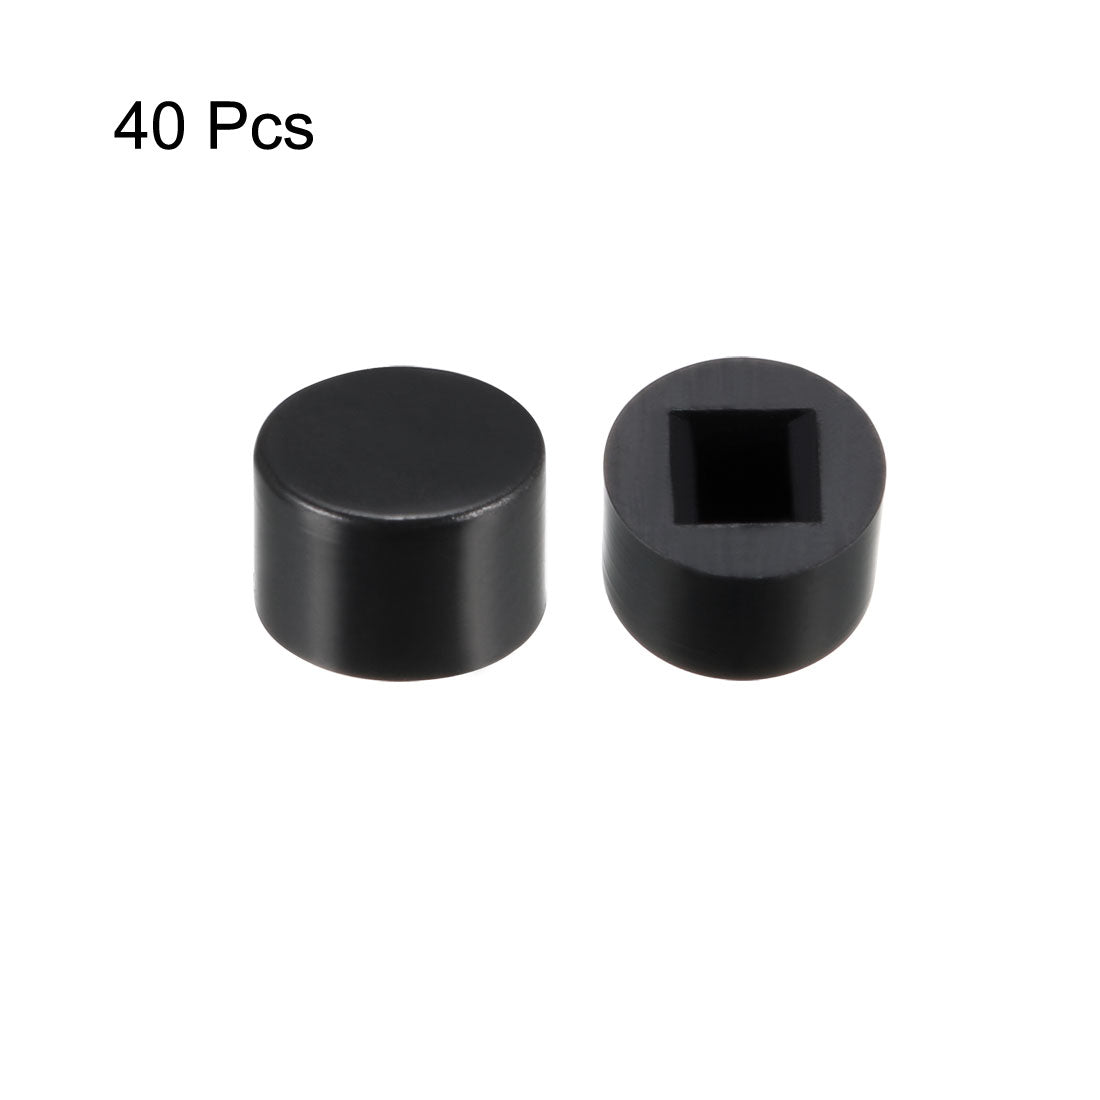 uxcell Uxcell 40Pcs Plastic 6x3.7mm Pushbutton Switch Caps Cover Keycaps Protector for 5.8x5.8 Latching Tactile Switch Black